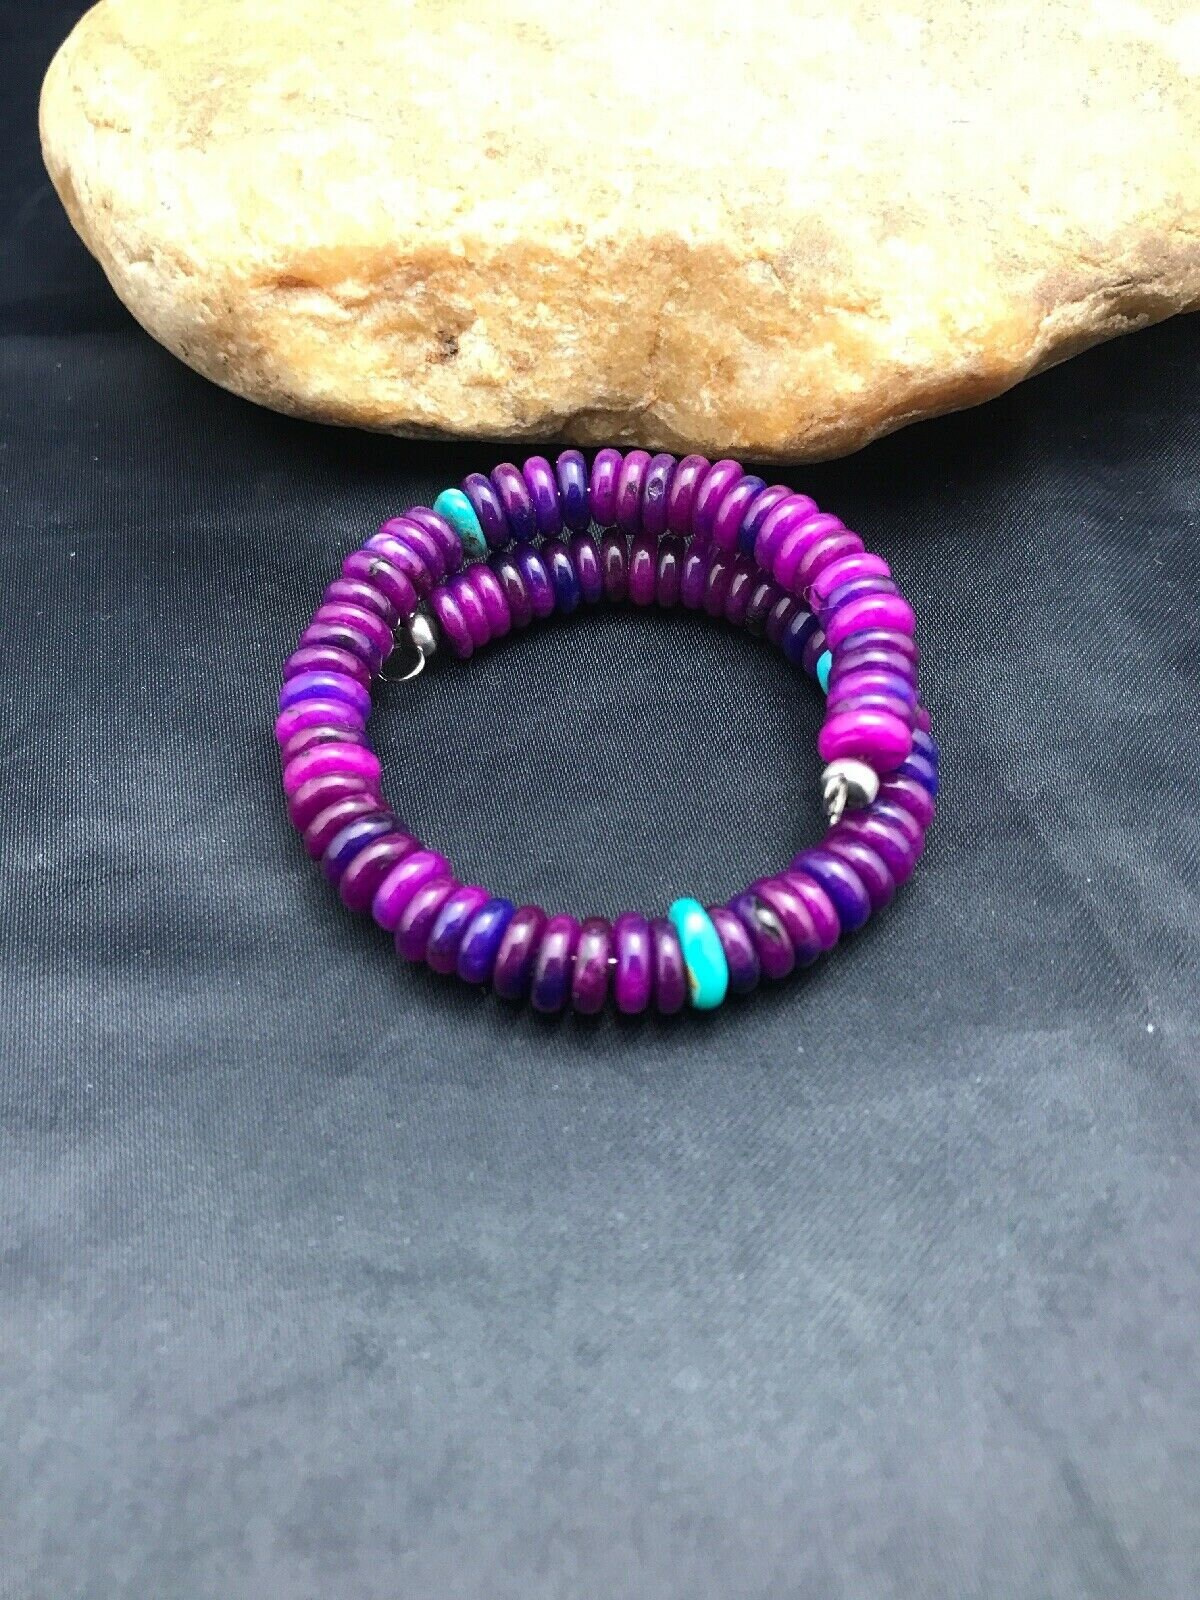 Details about   Native American Sterling Silver Sugilite Turquoise Bead Bracelet 266 